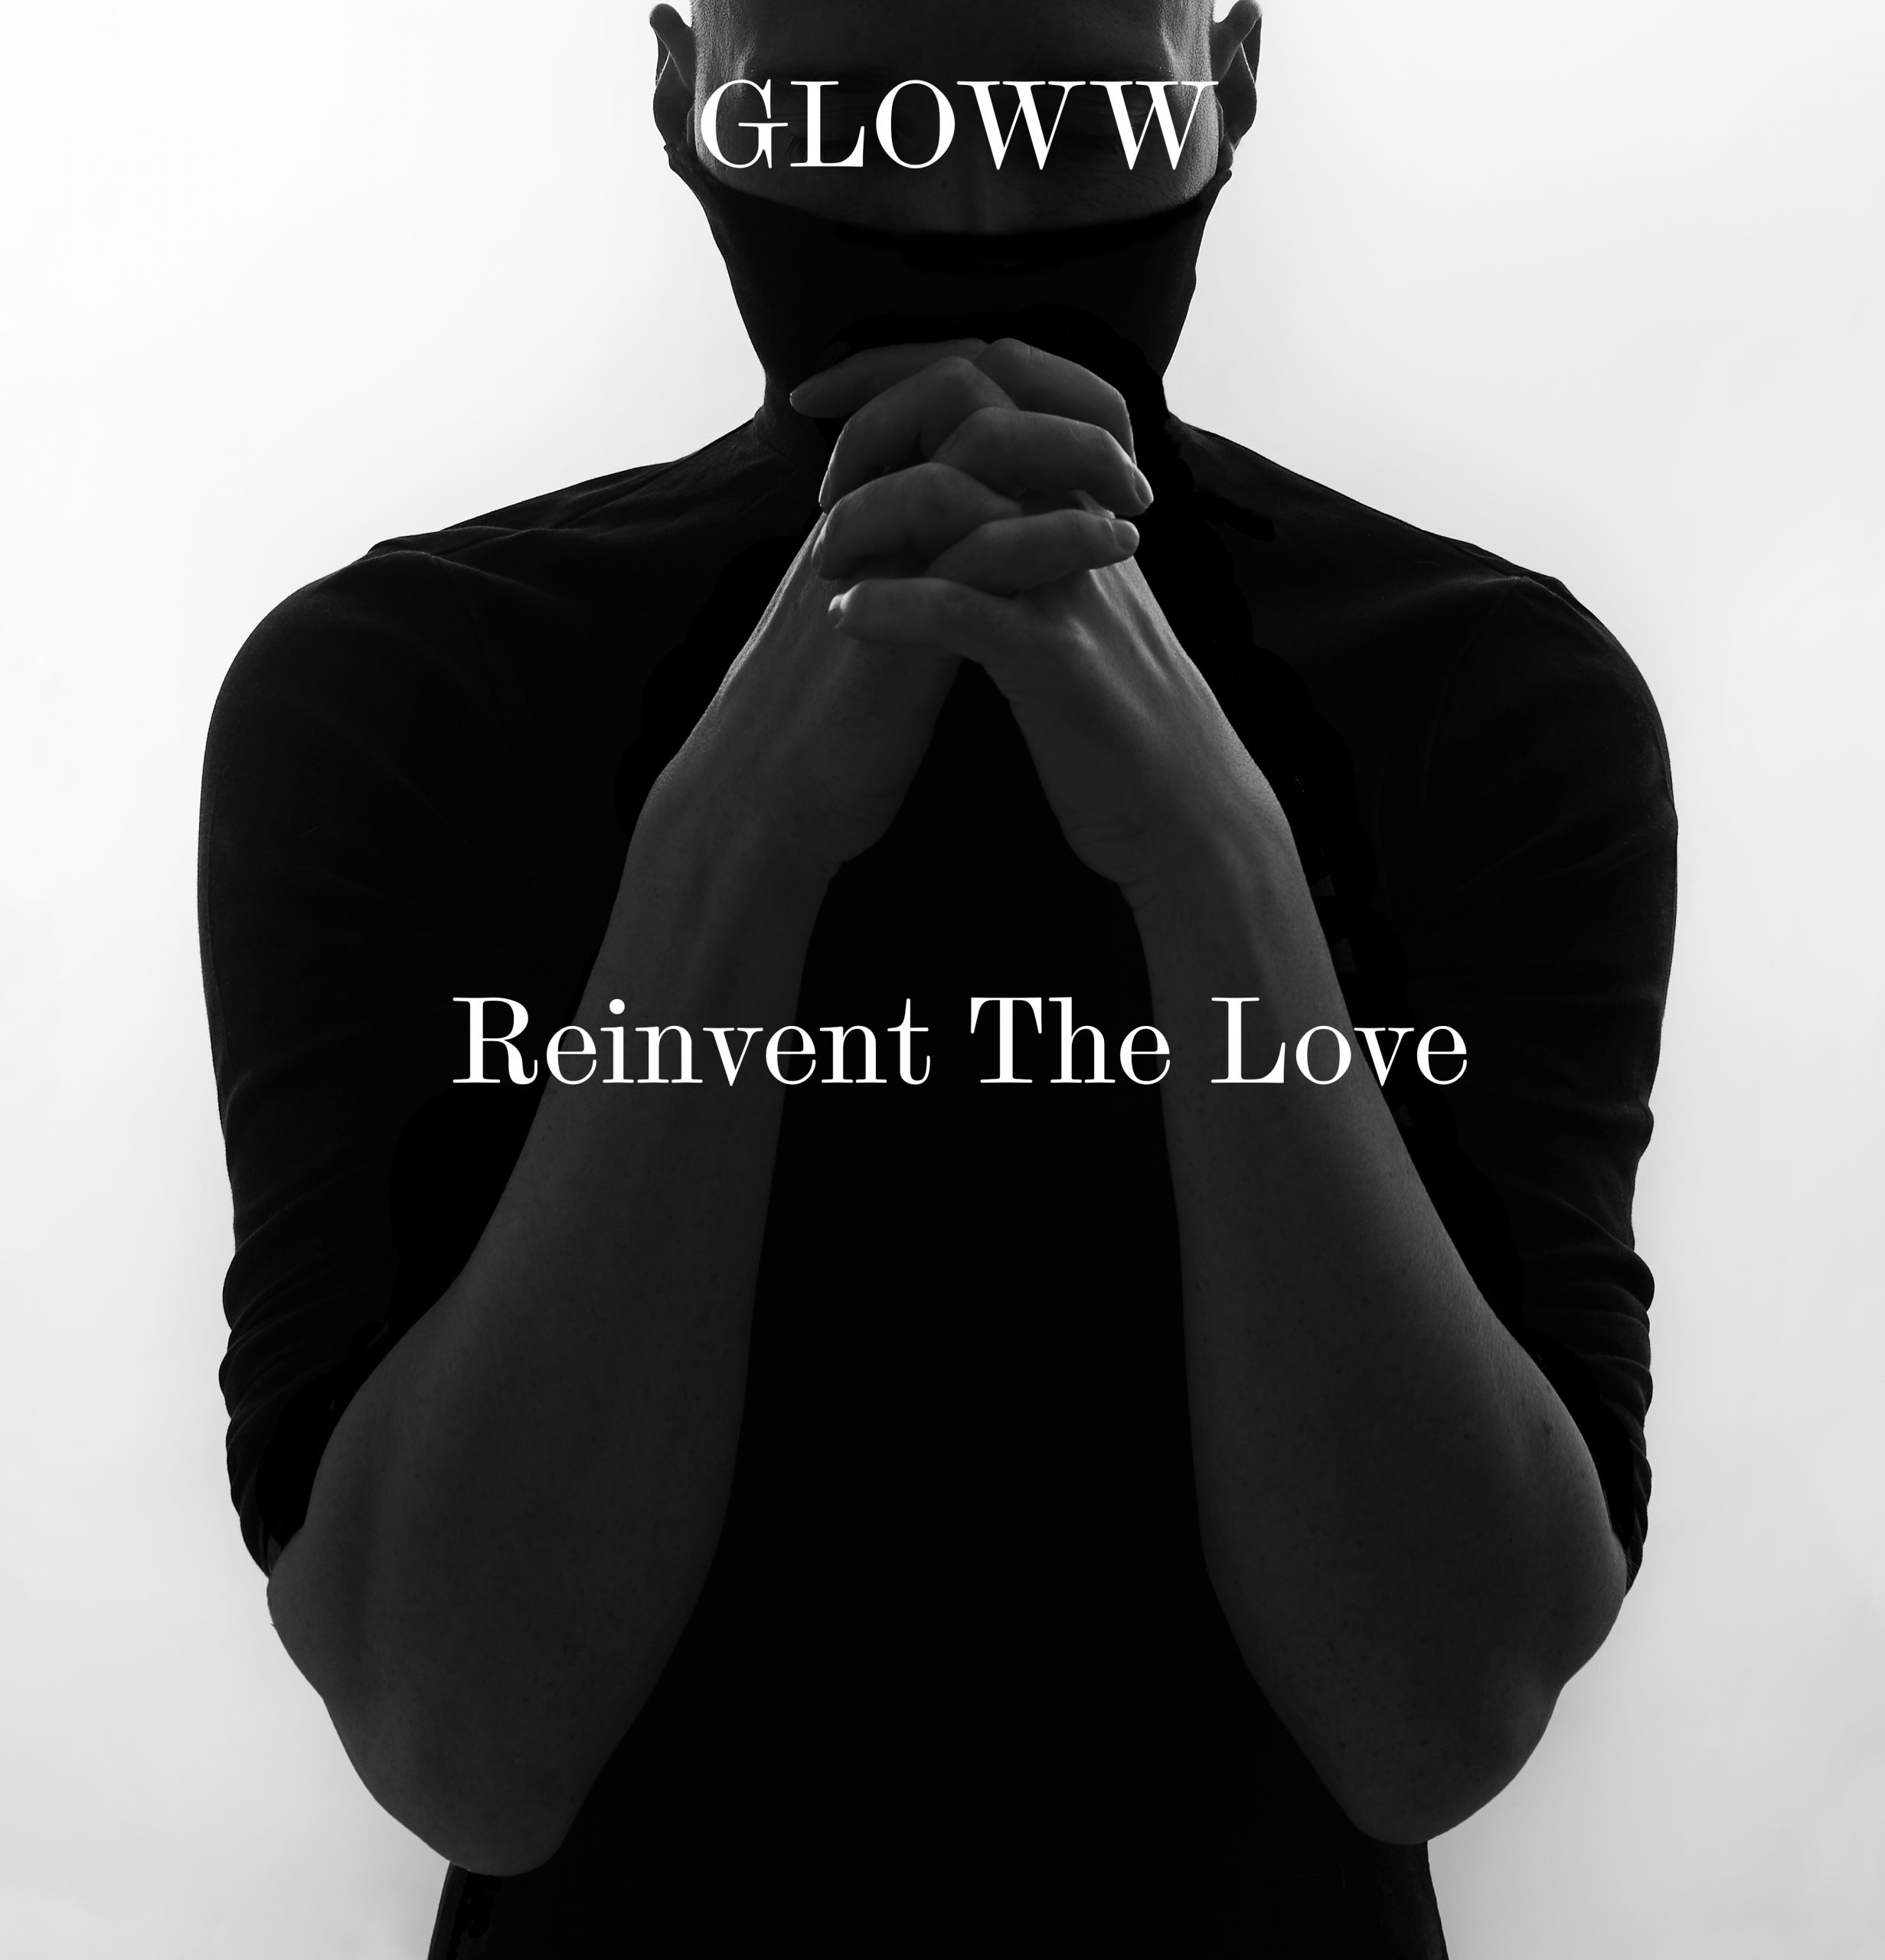 GLOWW creates his music by himself manifesting it through the sensual on new single ‘Reinvent The Love’